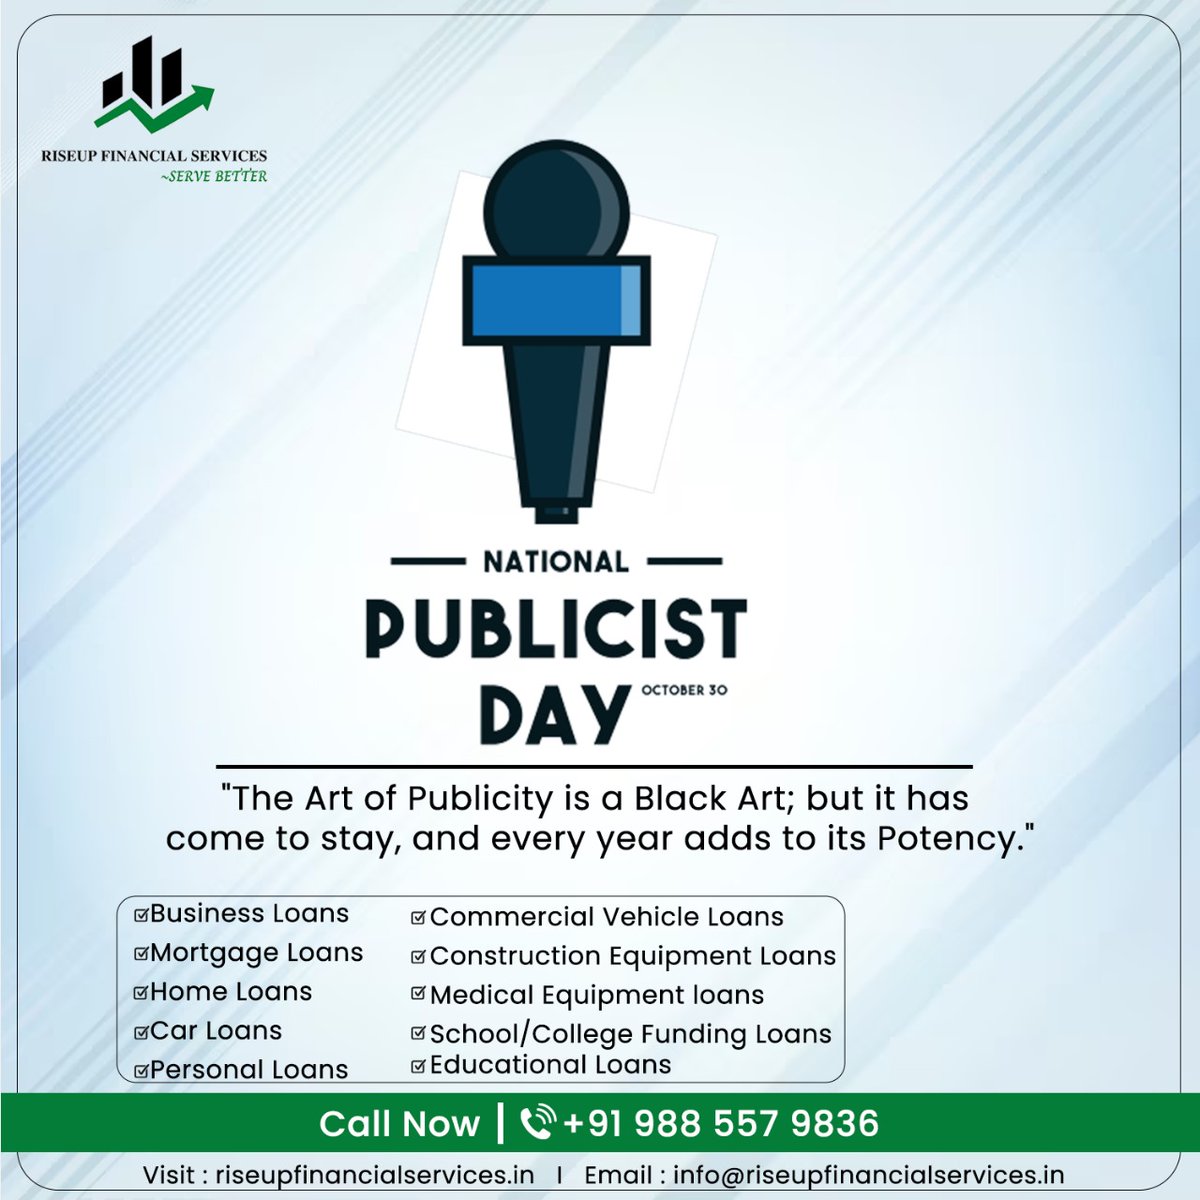 📣 Happy National Publicist Day! 🗞️ On October 30th, we celebrate the art of publicity, a powerful tool that continues to grow in strength year by year.
#riseupfinancialservices #loanservices #loans #businessloans #martgageloans #homeloans #homeloanservice #carloans #vehicleloans